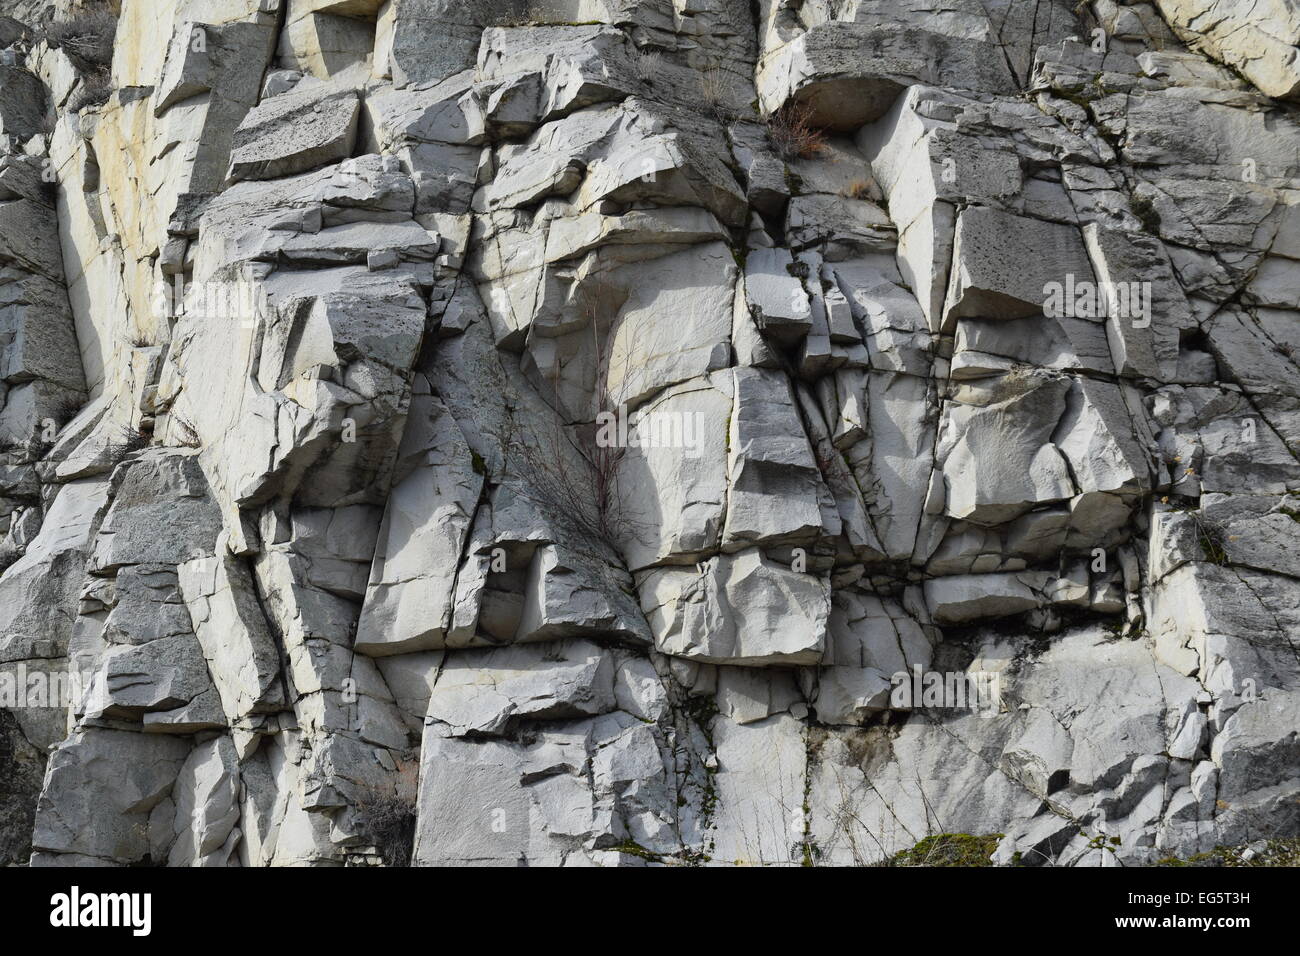 Group of rock faces. Stock Photo